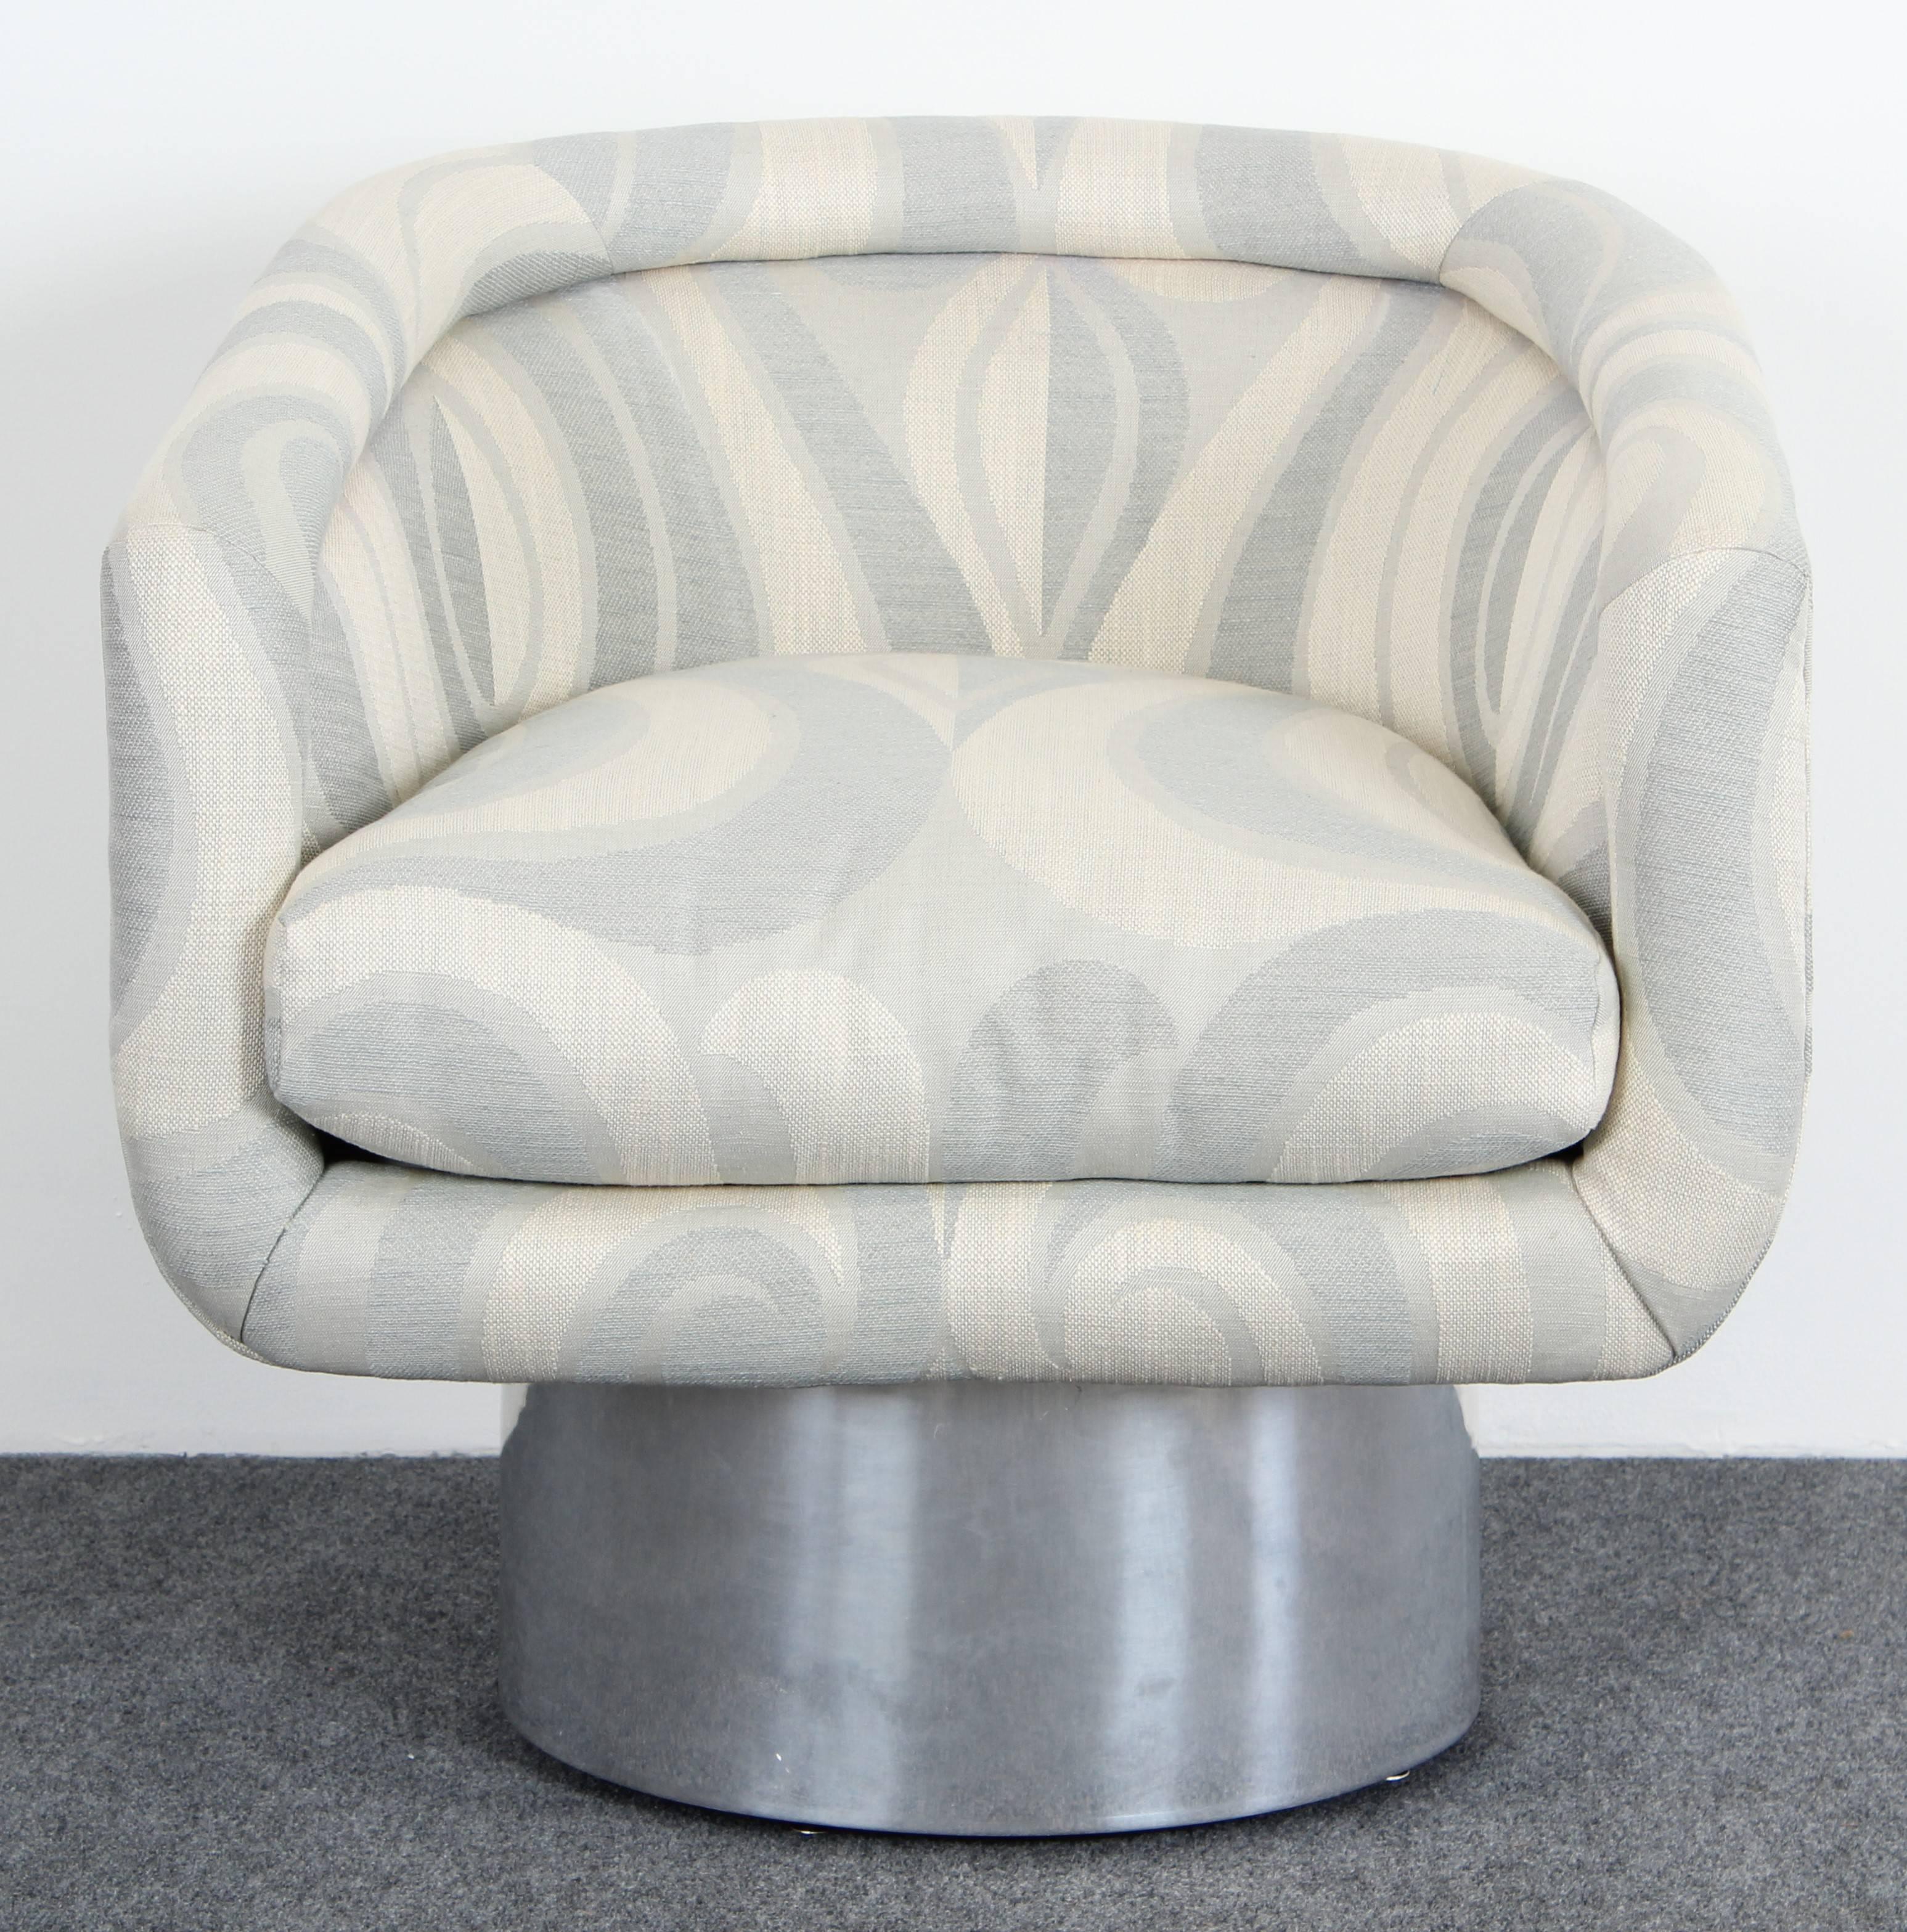 A stunning Leon Rosen for Pace Swivel lounge chair, circa 1970s. The pedestal base is made of polished solid aluminium. The fabric and aluminium are in very good condition. Two pairs are also available.